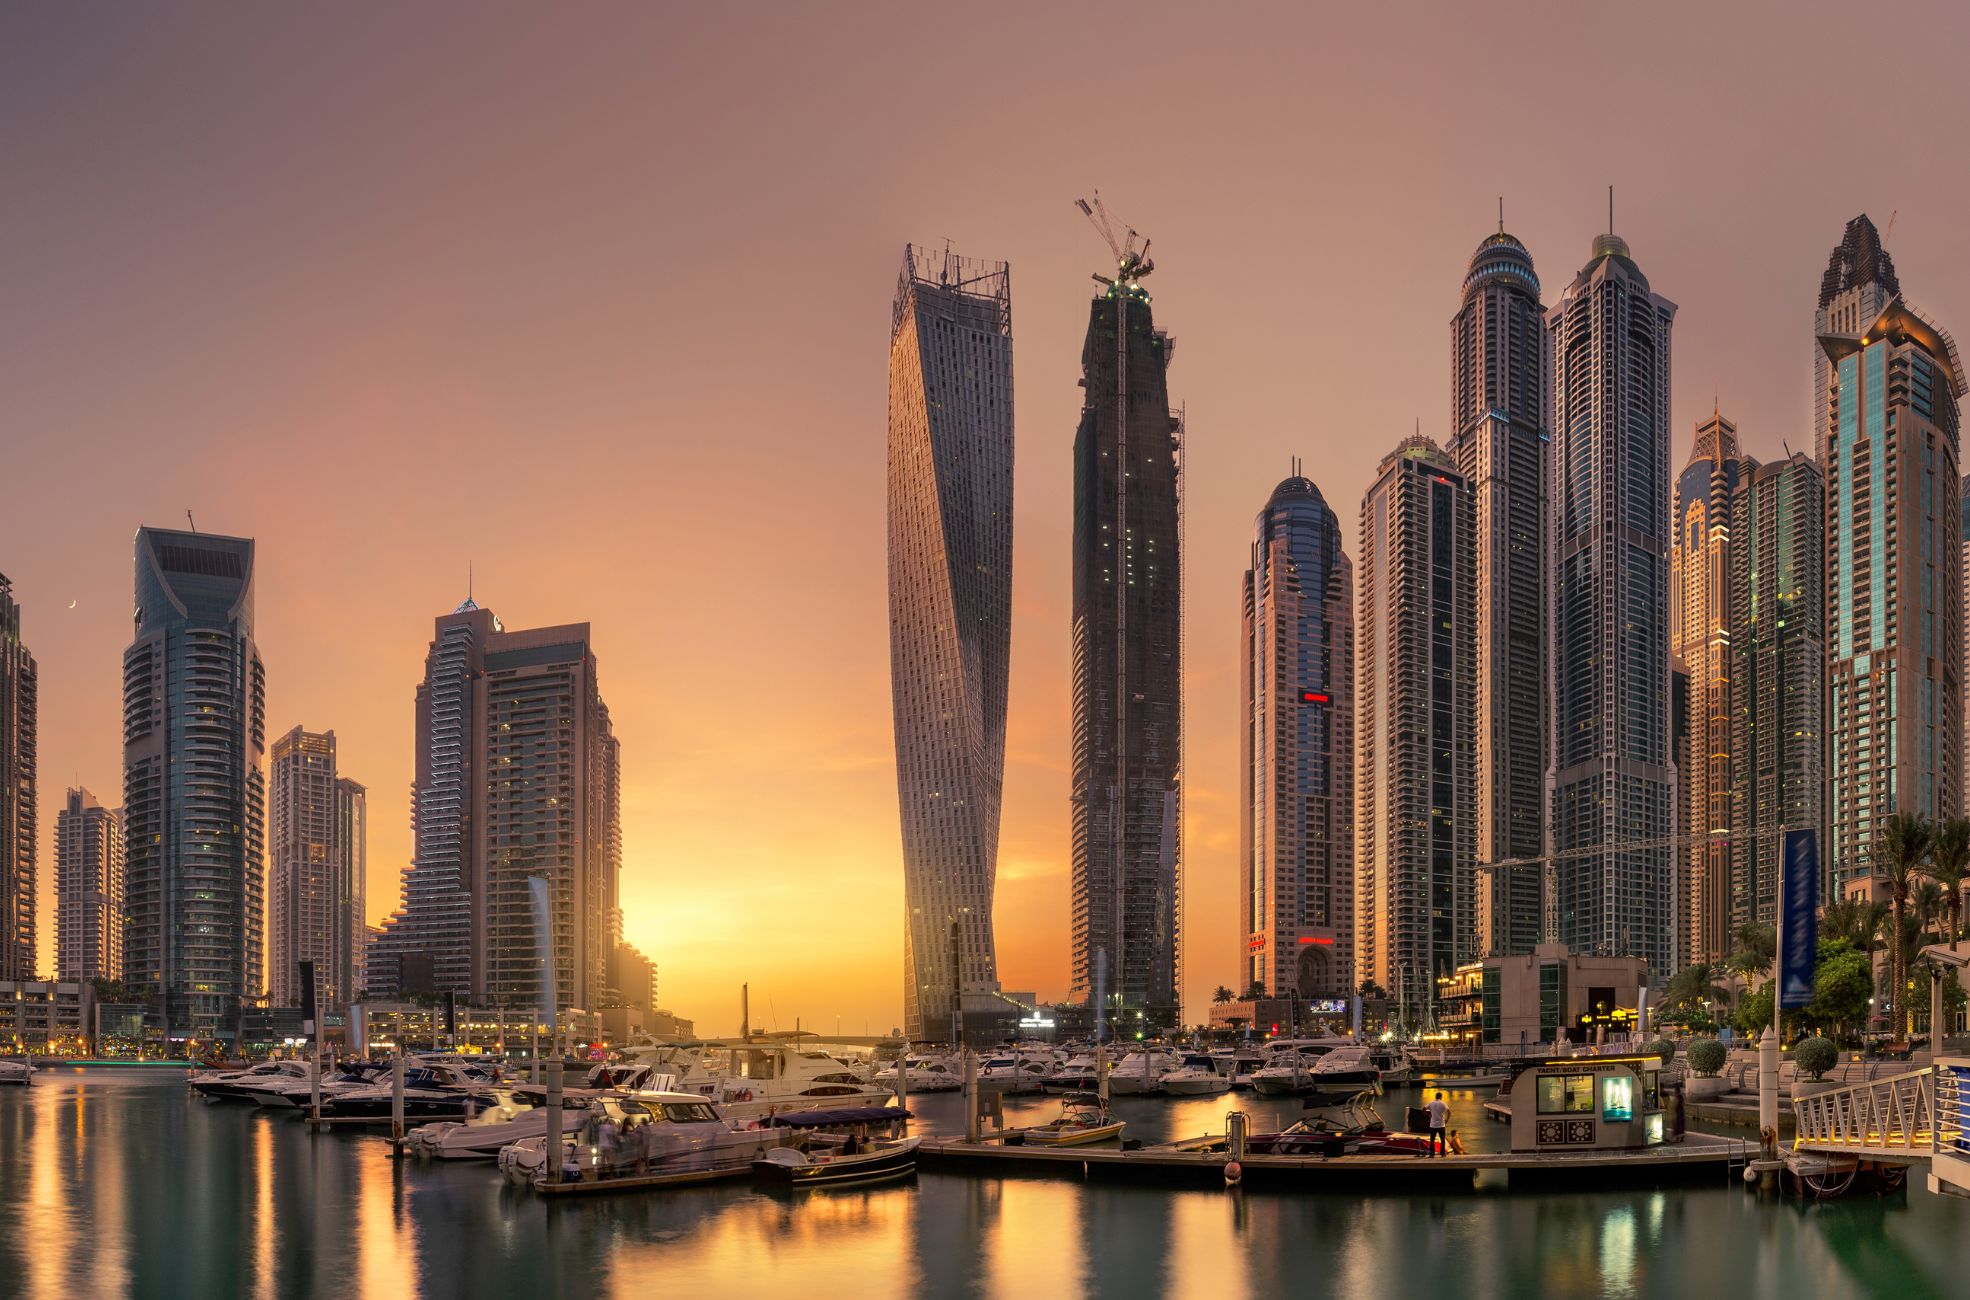 Harbour, Buildings And Sunset In Dubai